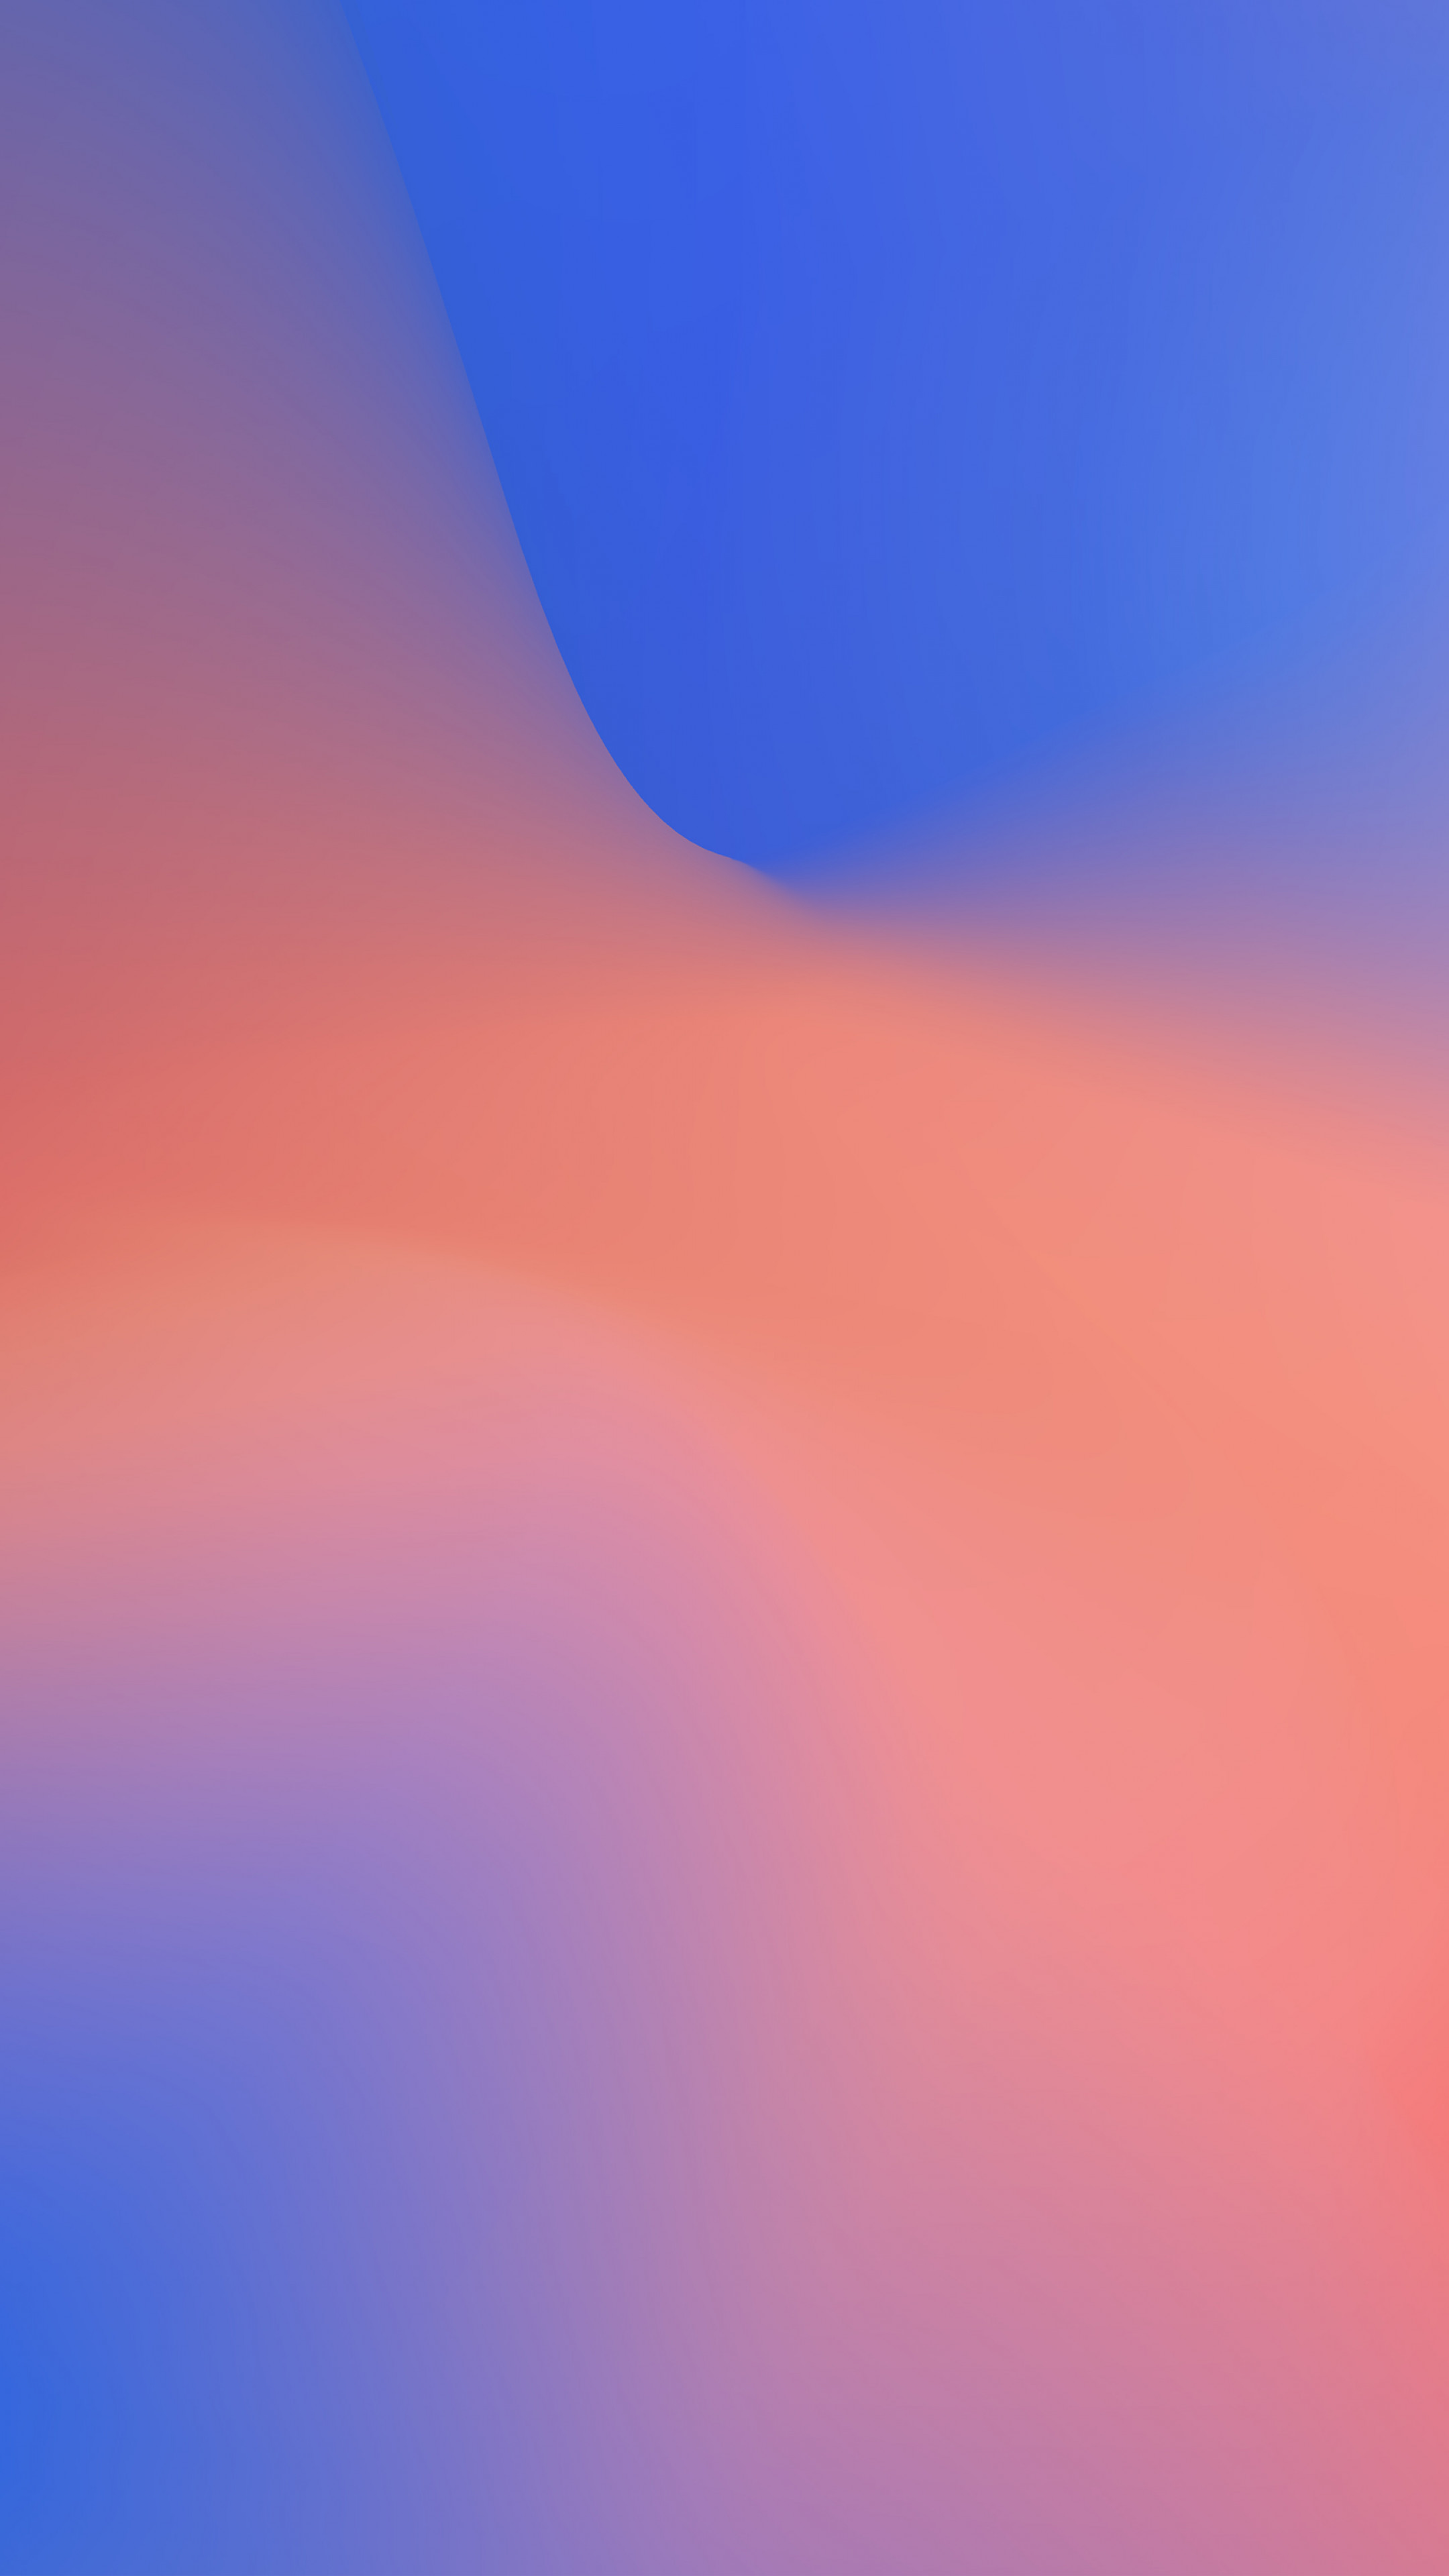 Wallpaper Google Pixel 3, Android 9 Pie, abstract, 4K, OS